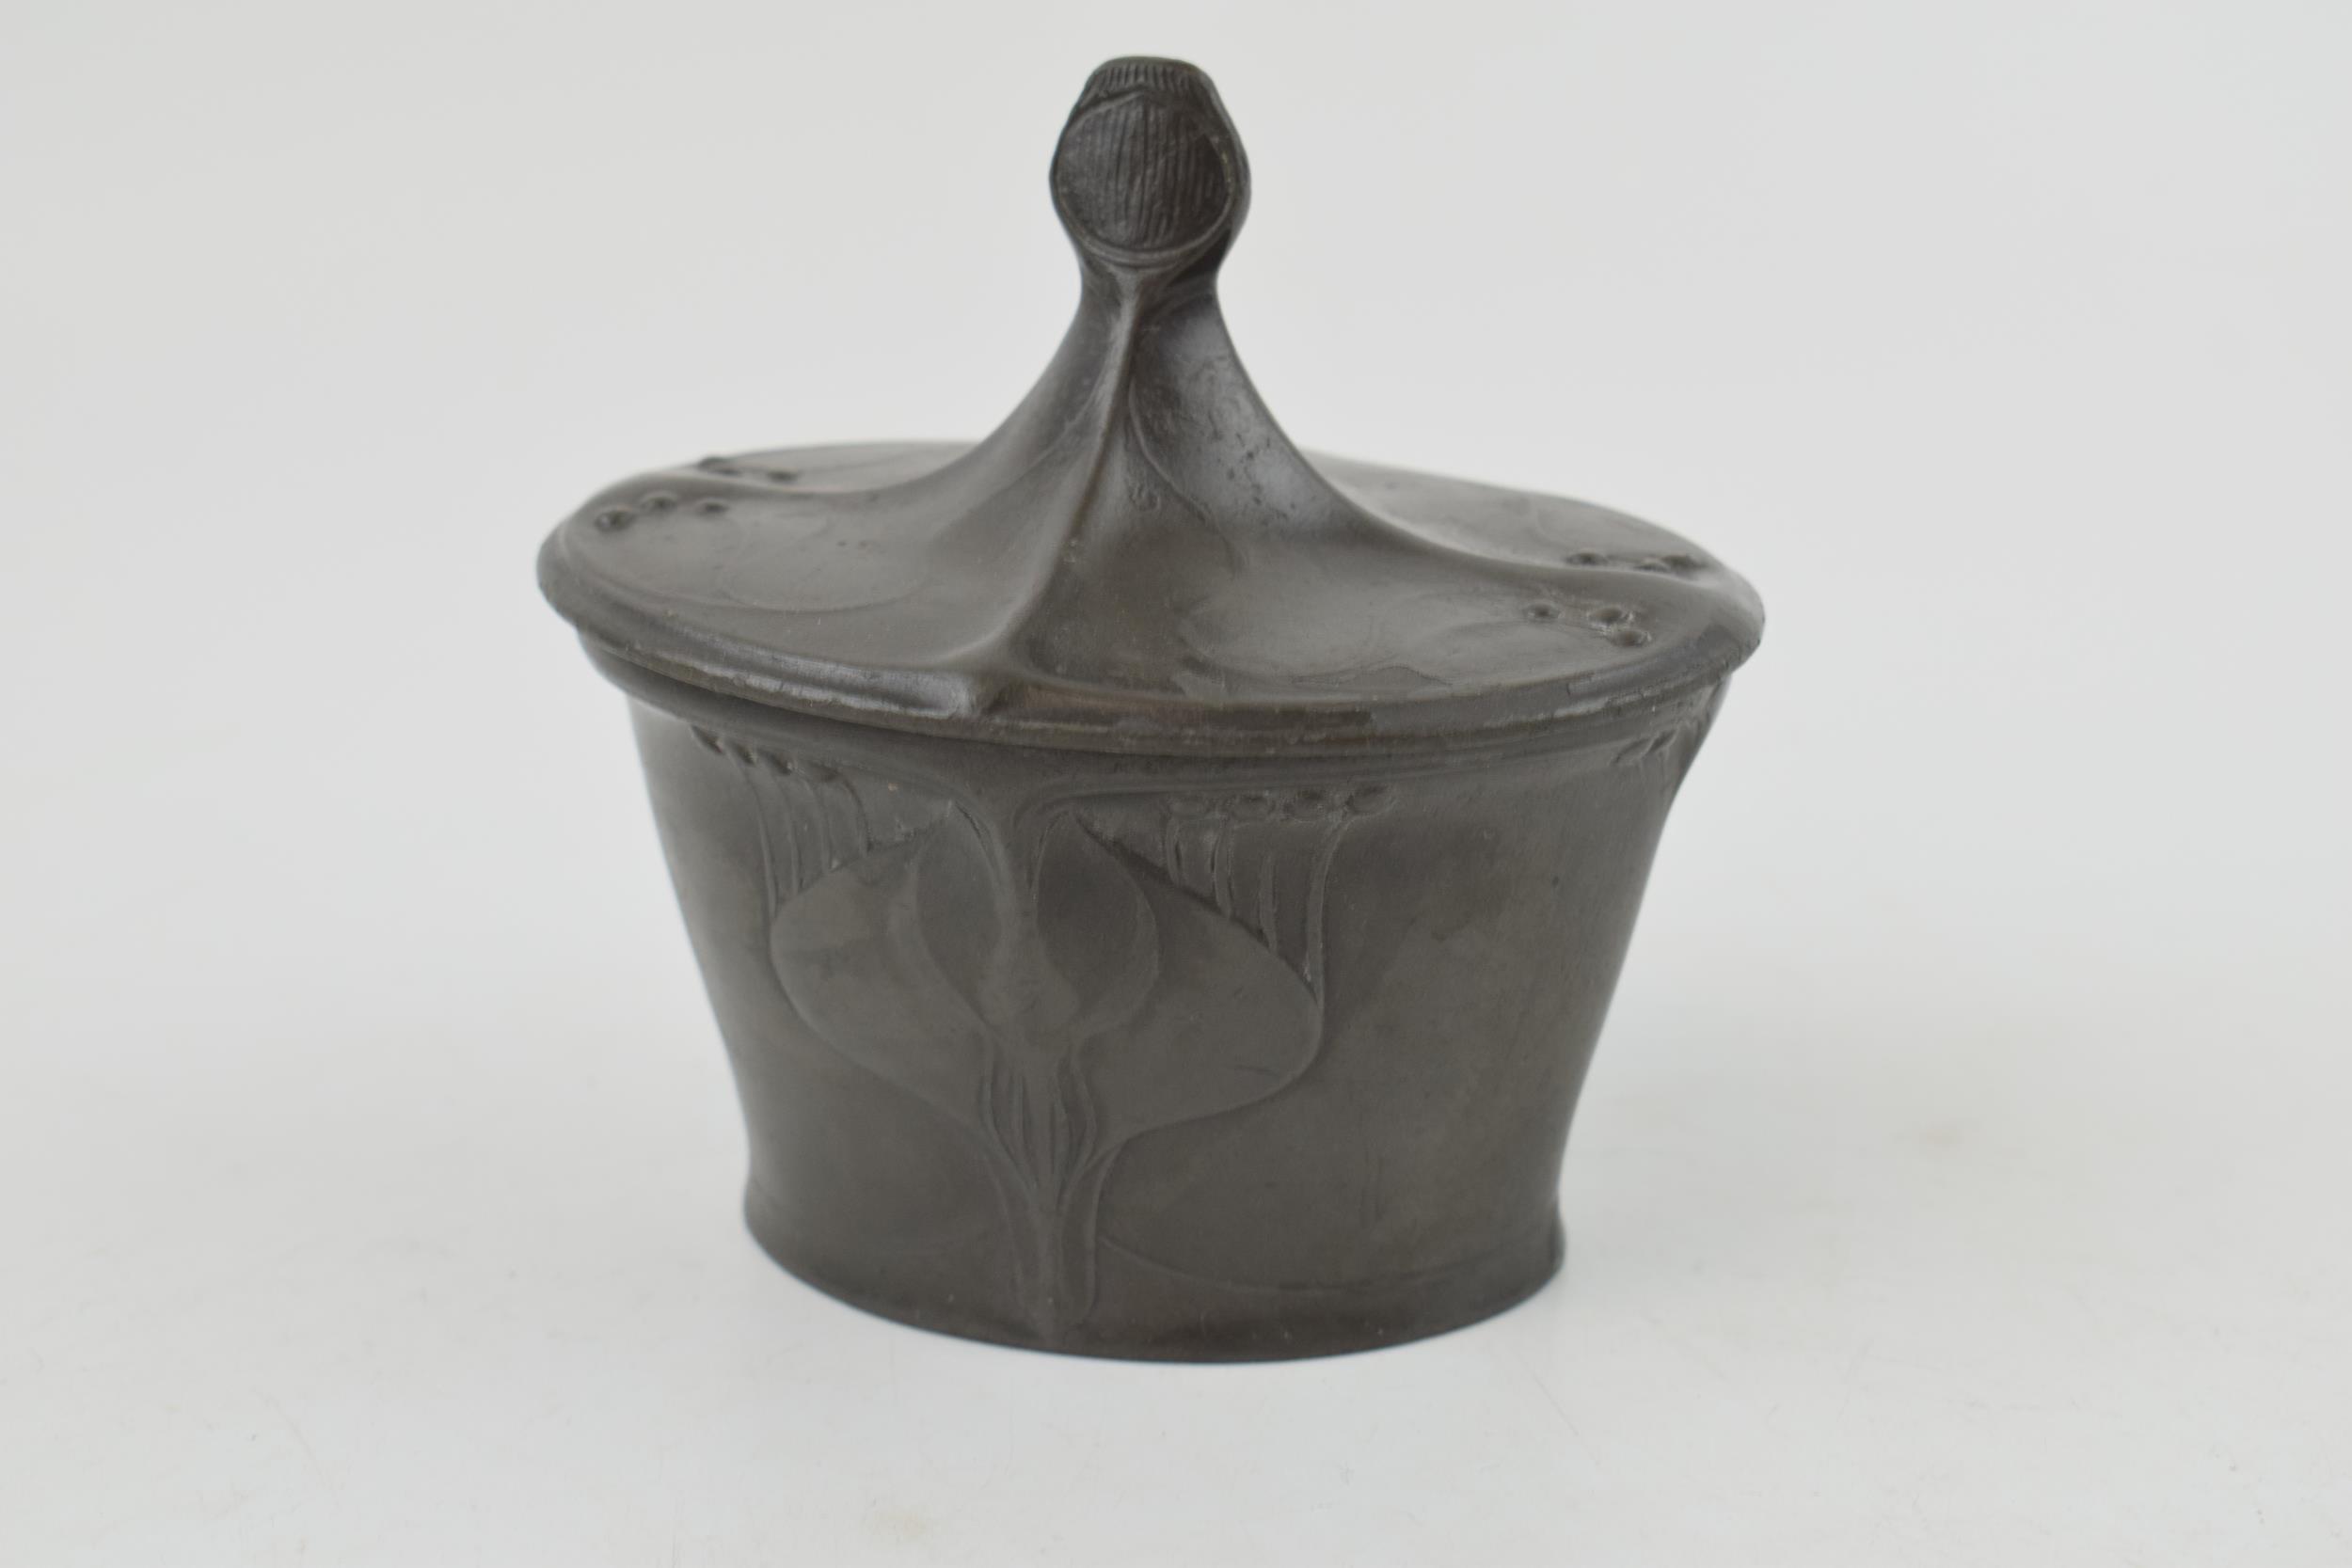 Art Nouveaux lidded pewter pot by "Kayserzinn" 4402. Stylised floral design repeated on lid. - Image 2 of 4